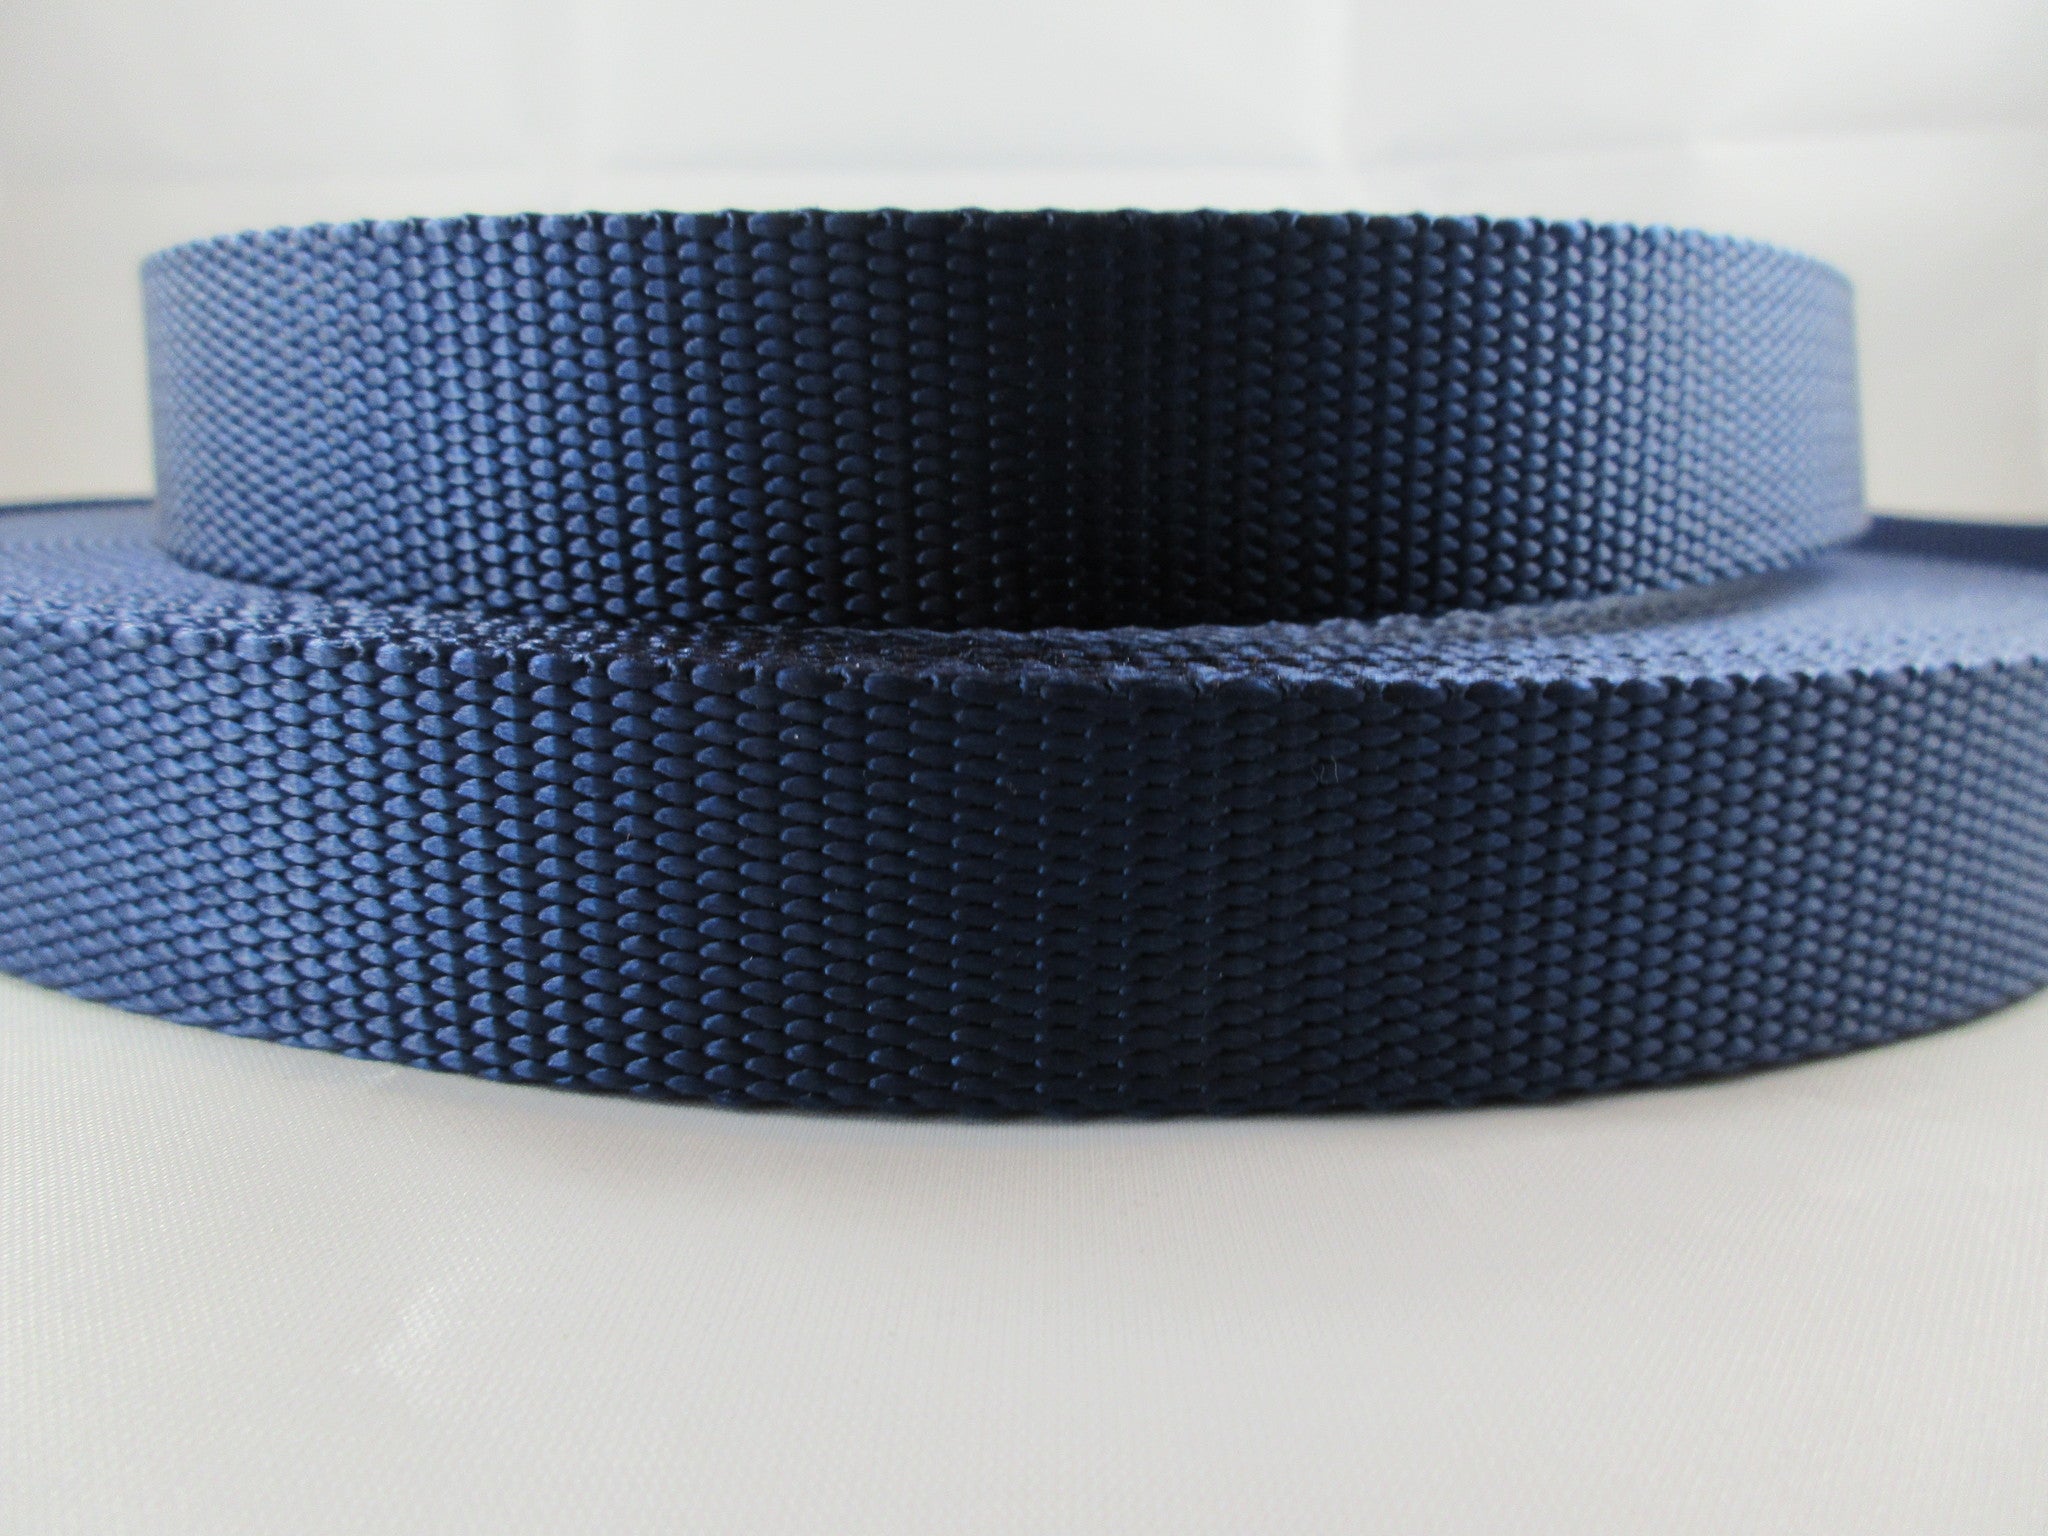 1" Navy Blue Nylon Dog Collar - Penny and Hoover's Pig Pen